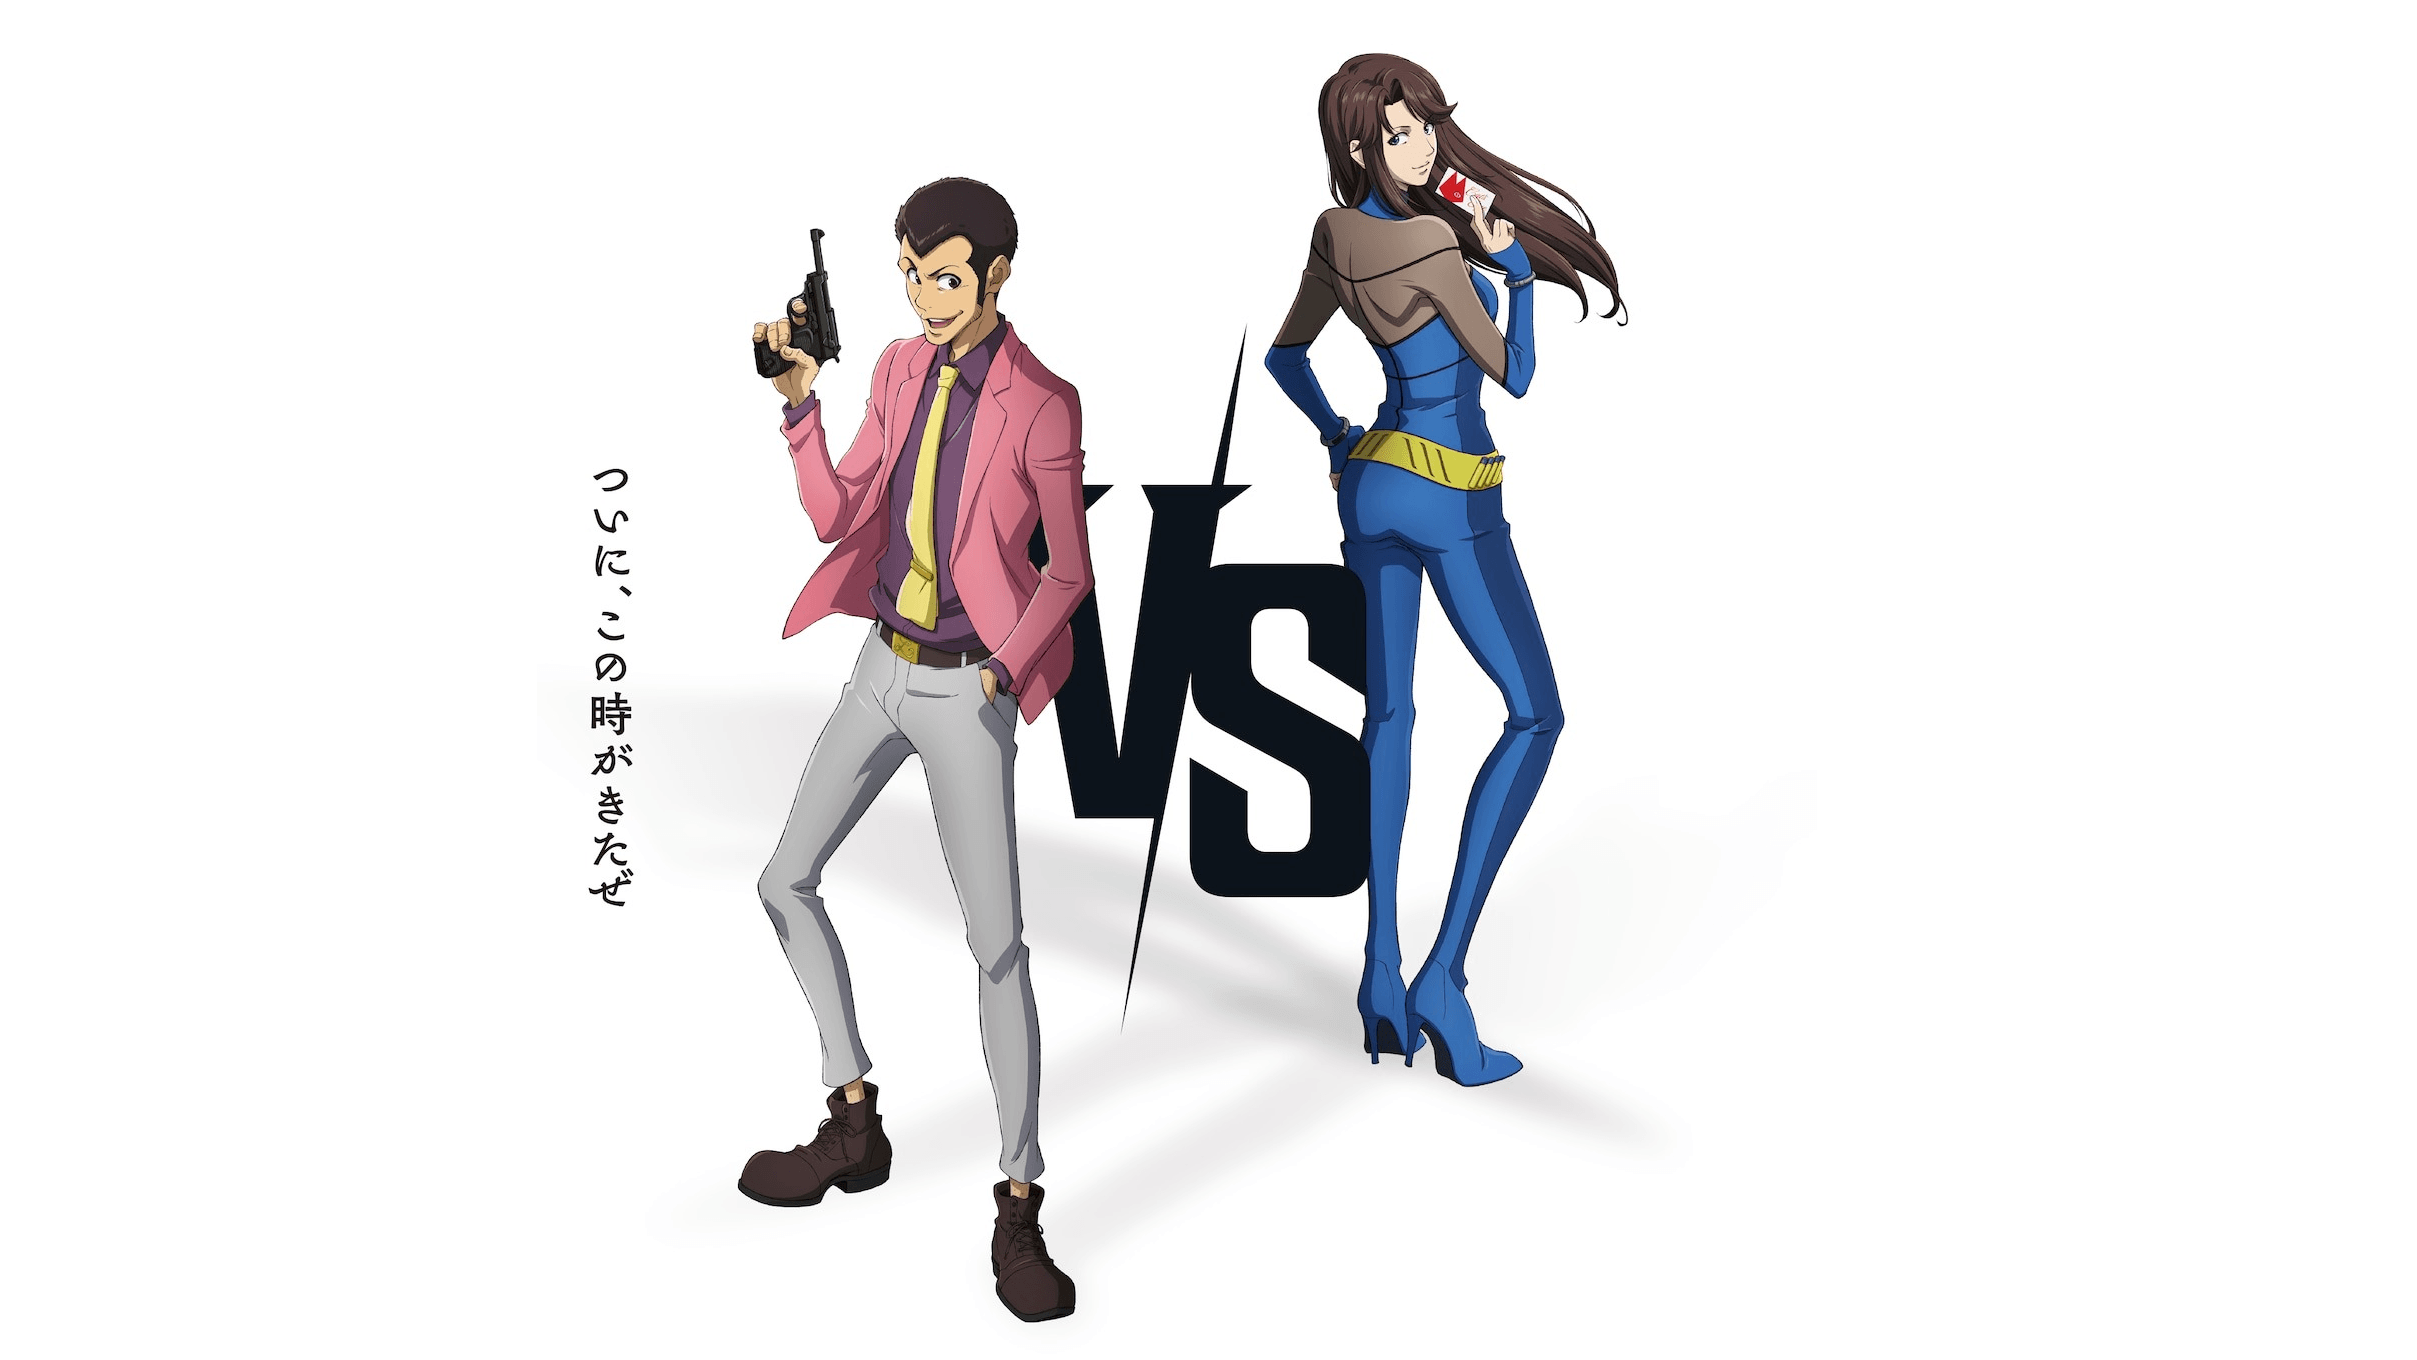 Cat's Eye meets Lupin the Third next year!